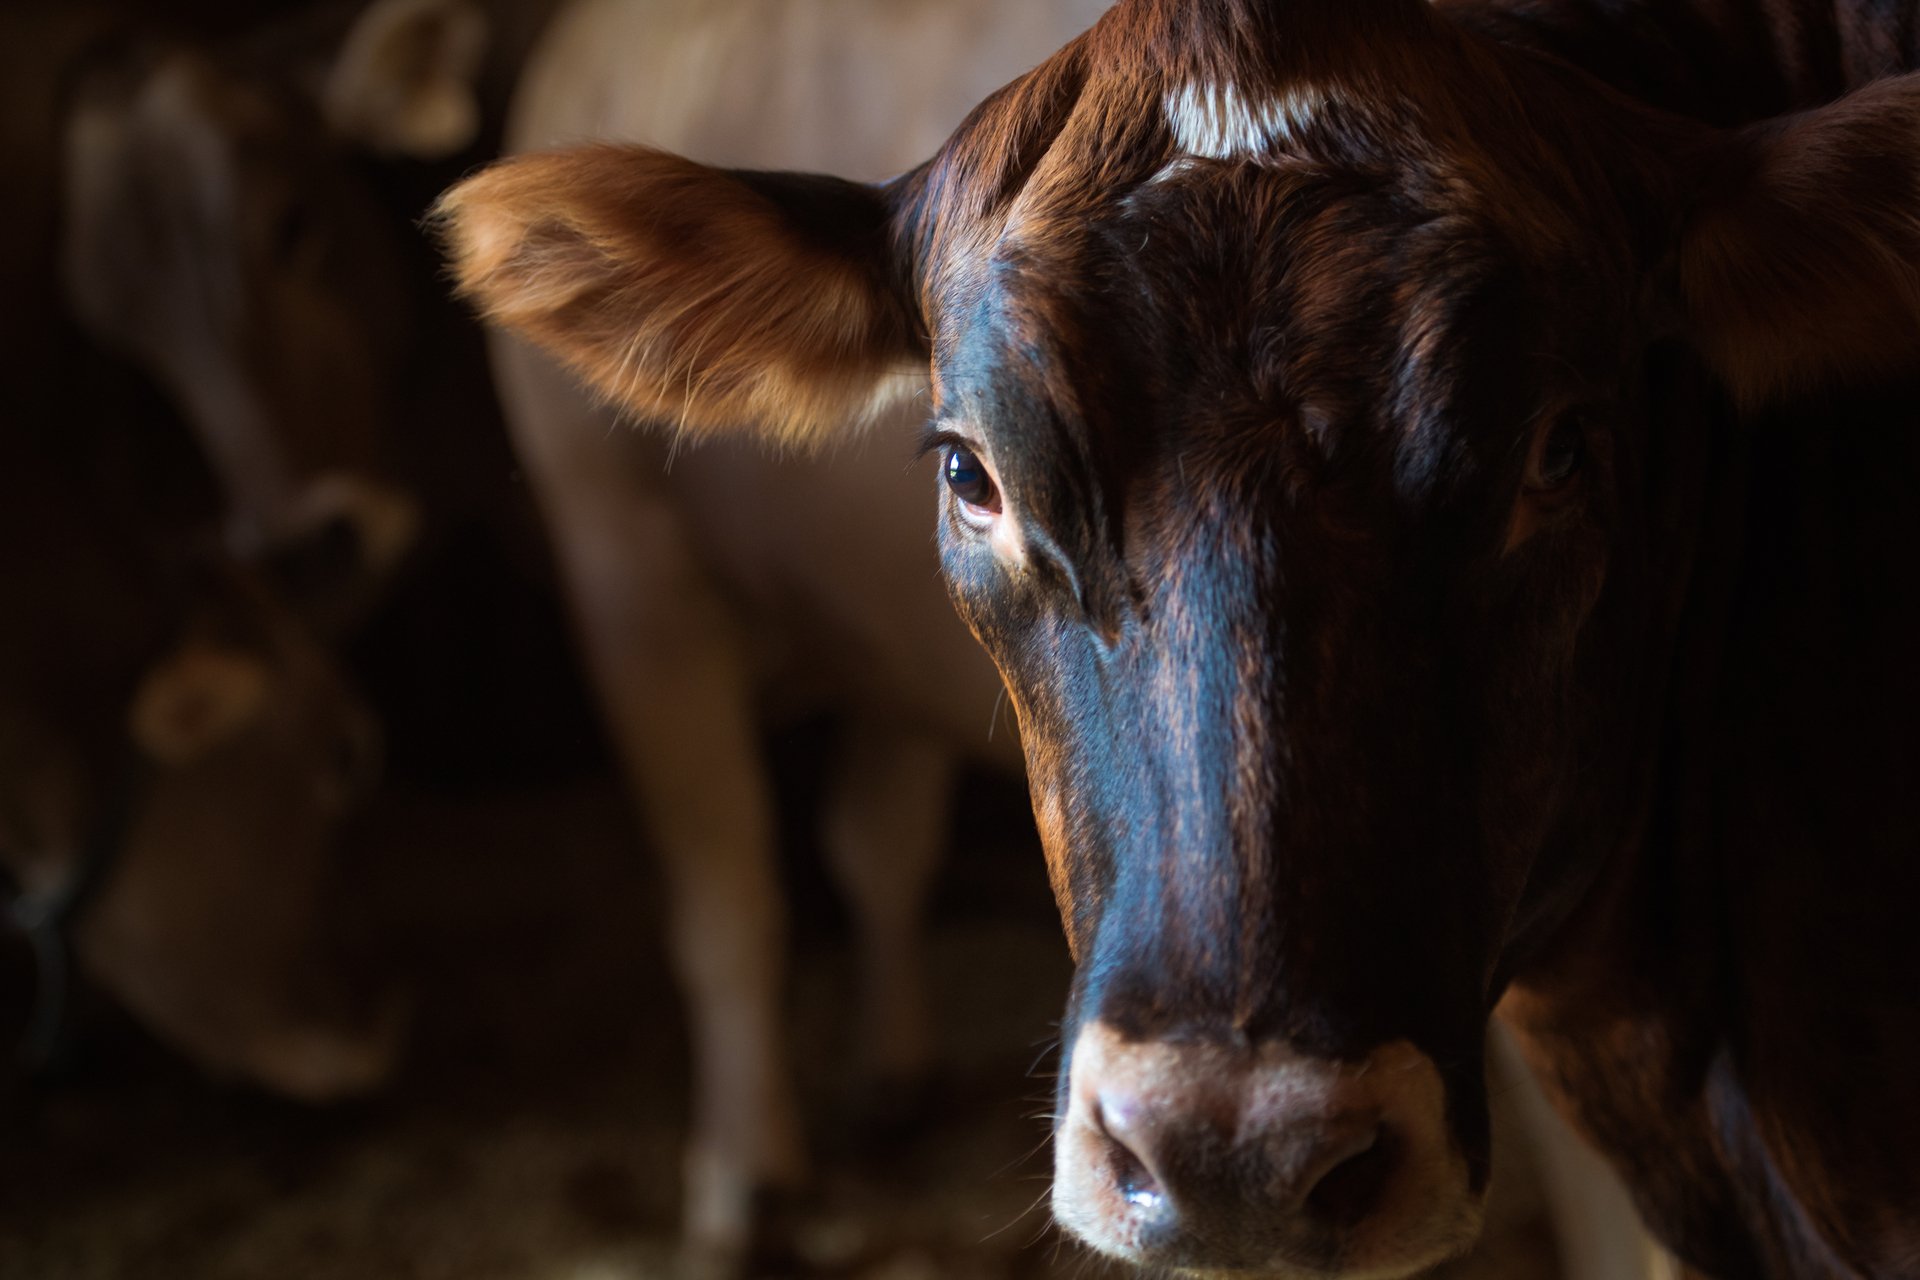 A brown and black cow looking directly at the camera. Its hard looks soft in the lighting.